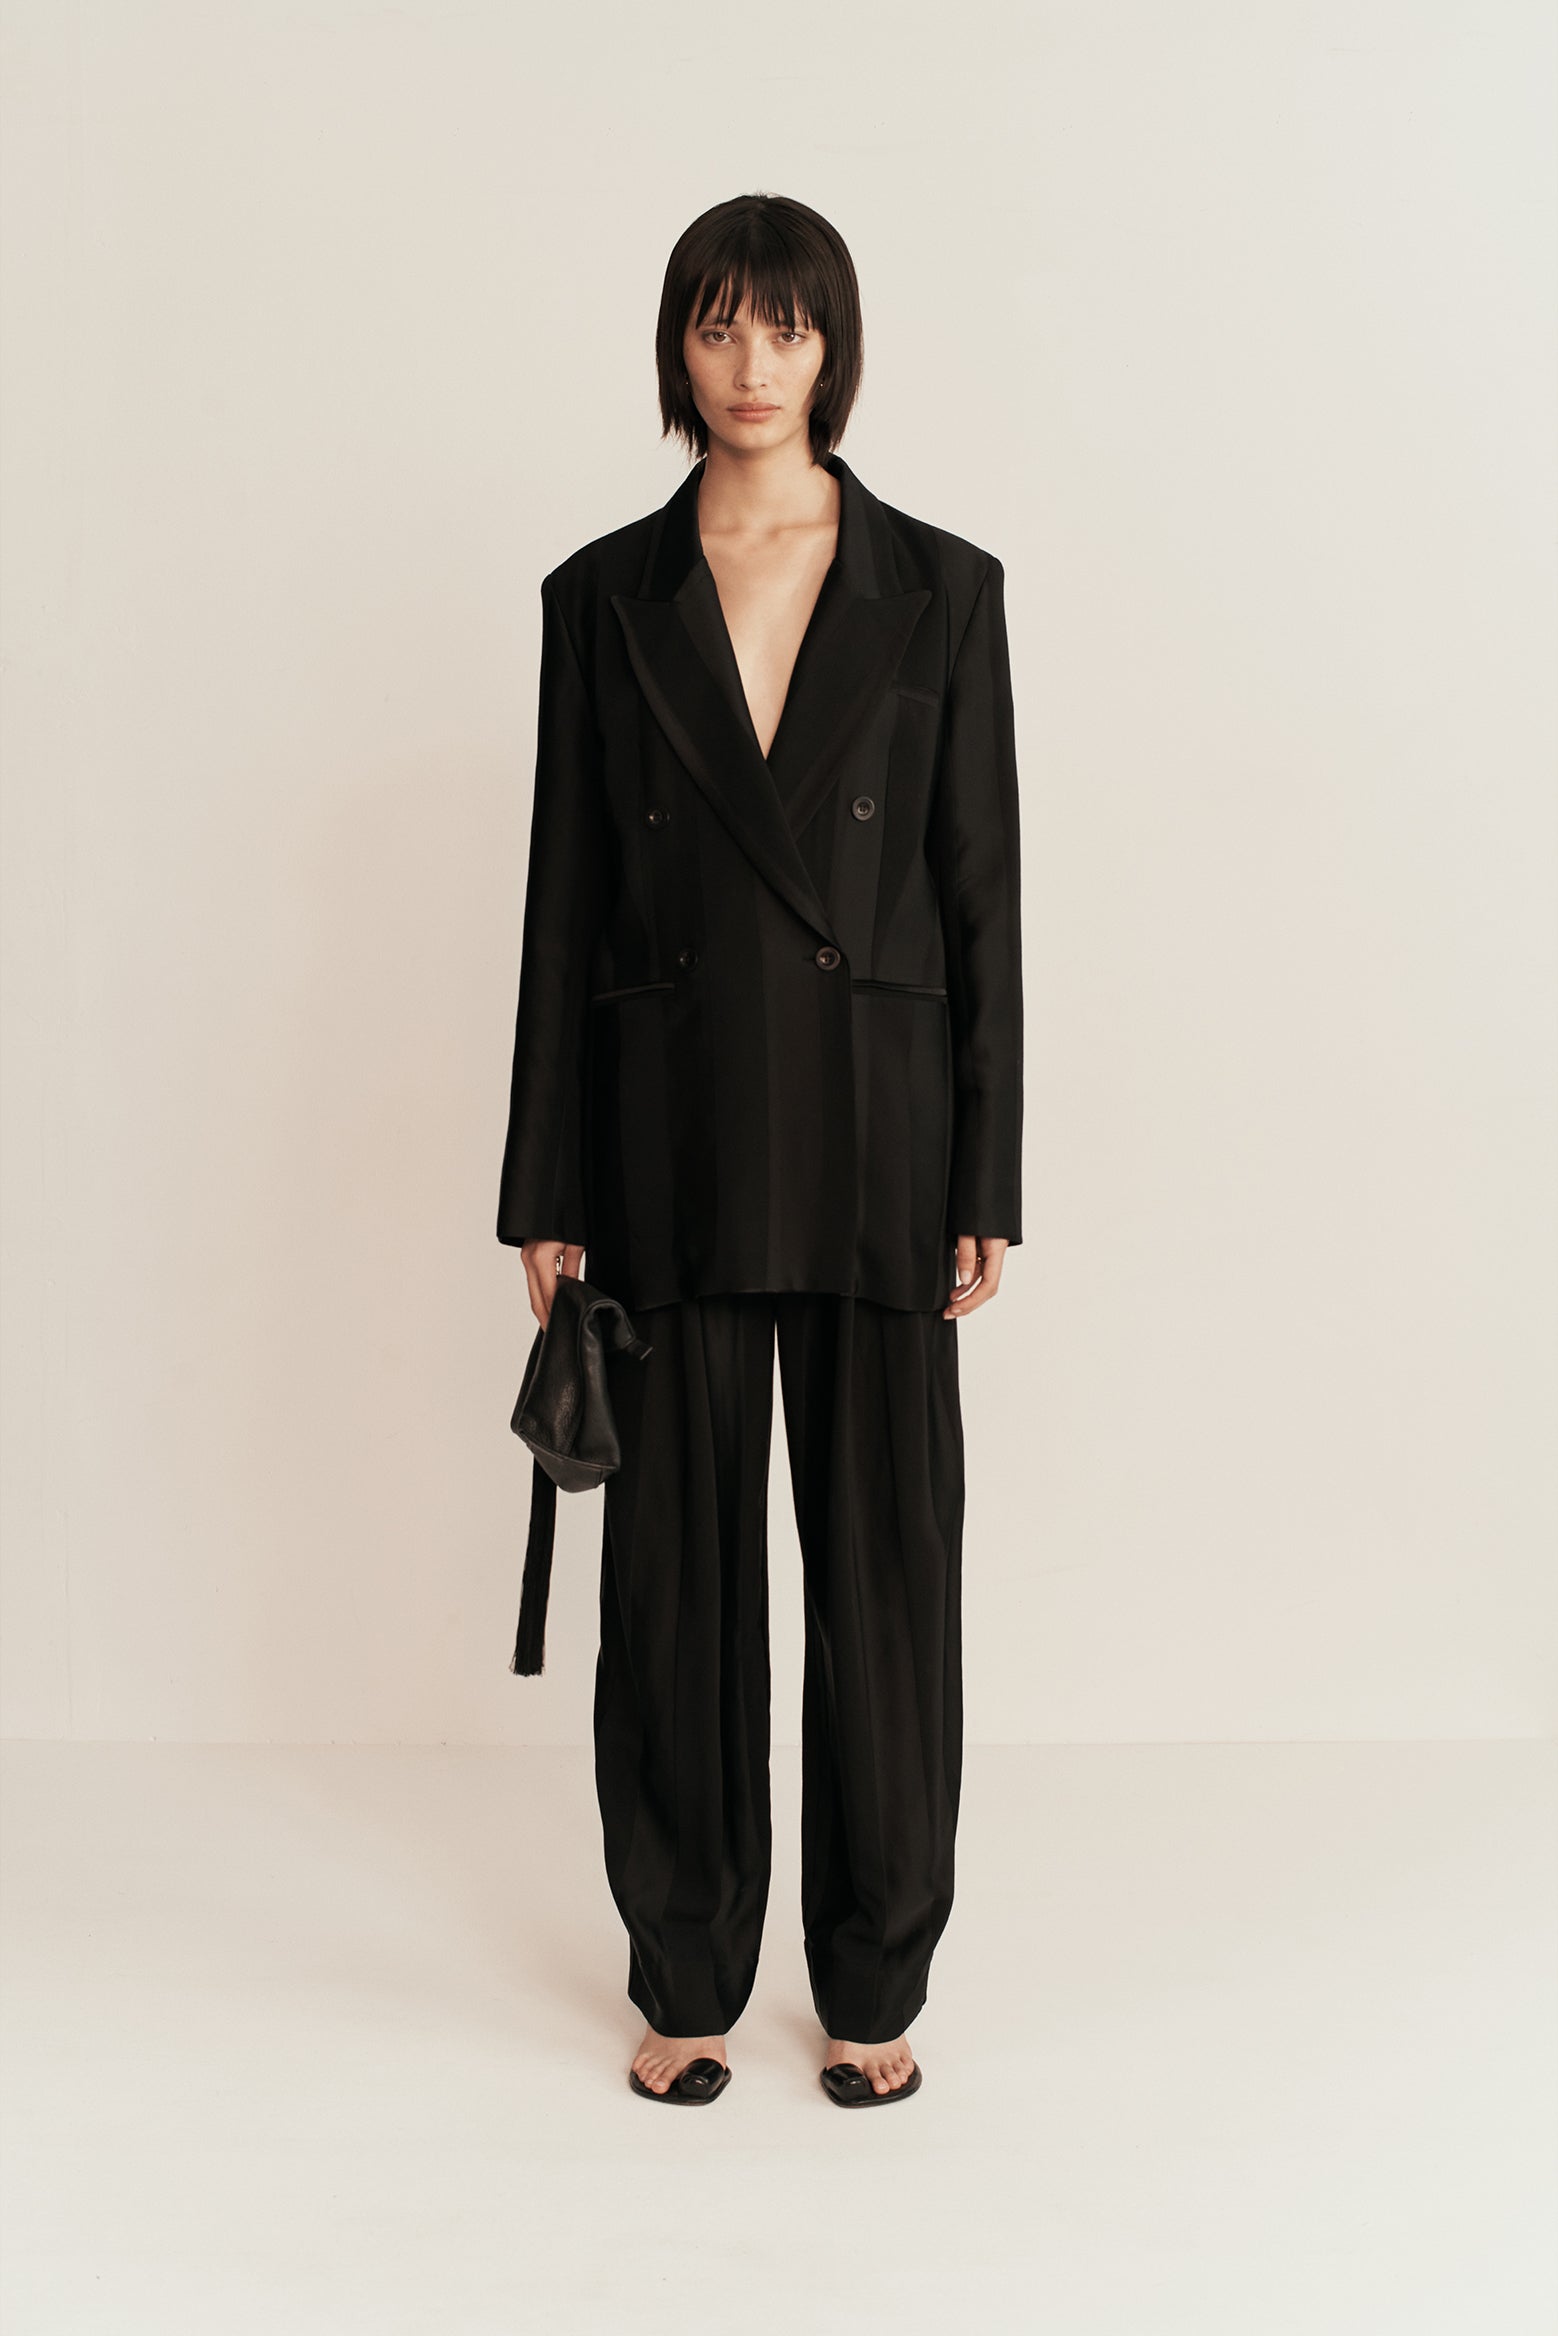 Esse Modus Blazer in Black available at The New Trend Australia.